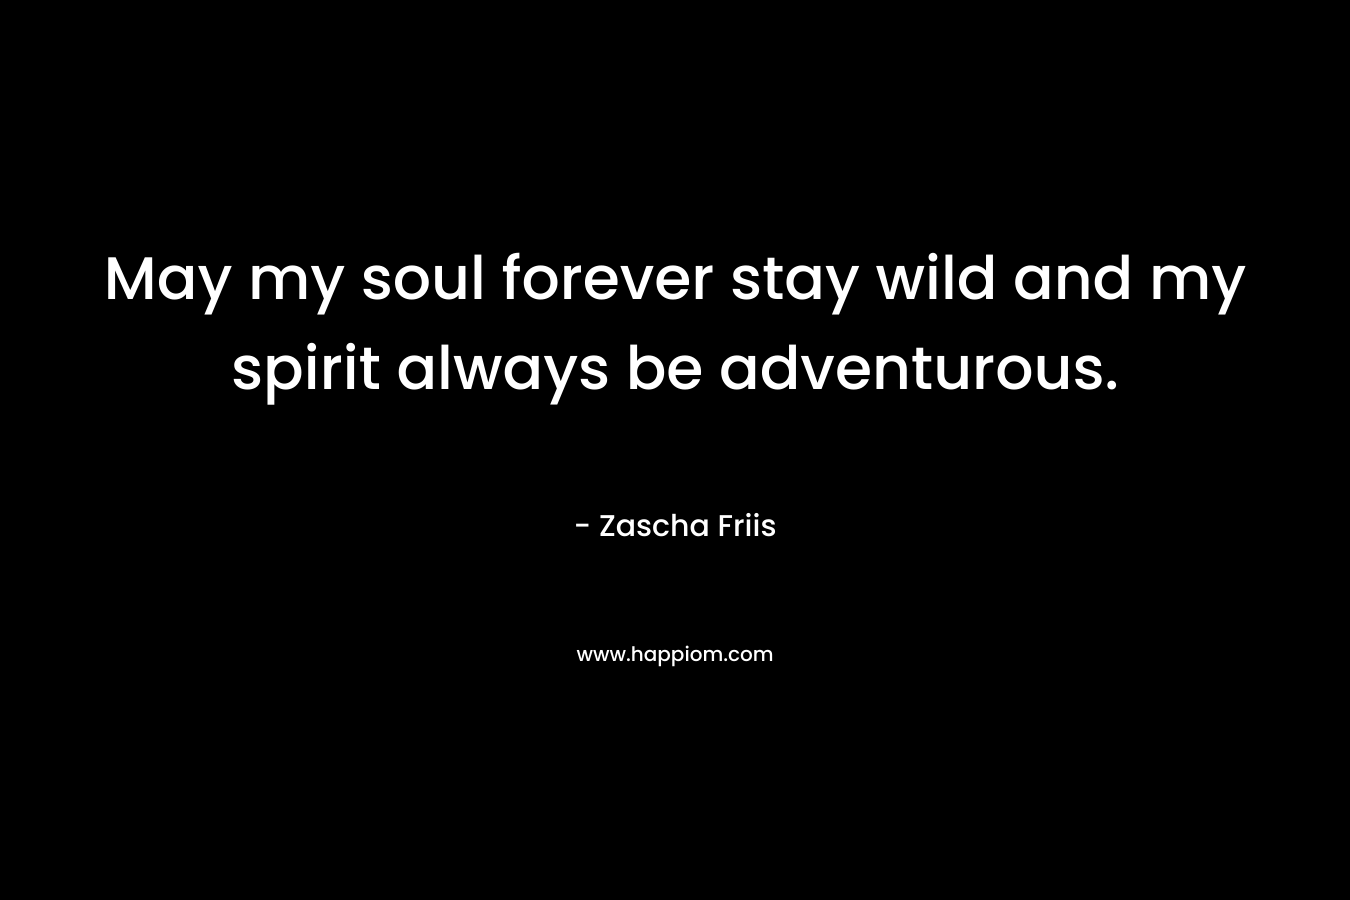 May my soul forever stay wild and my spirit always be adventurous.